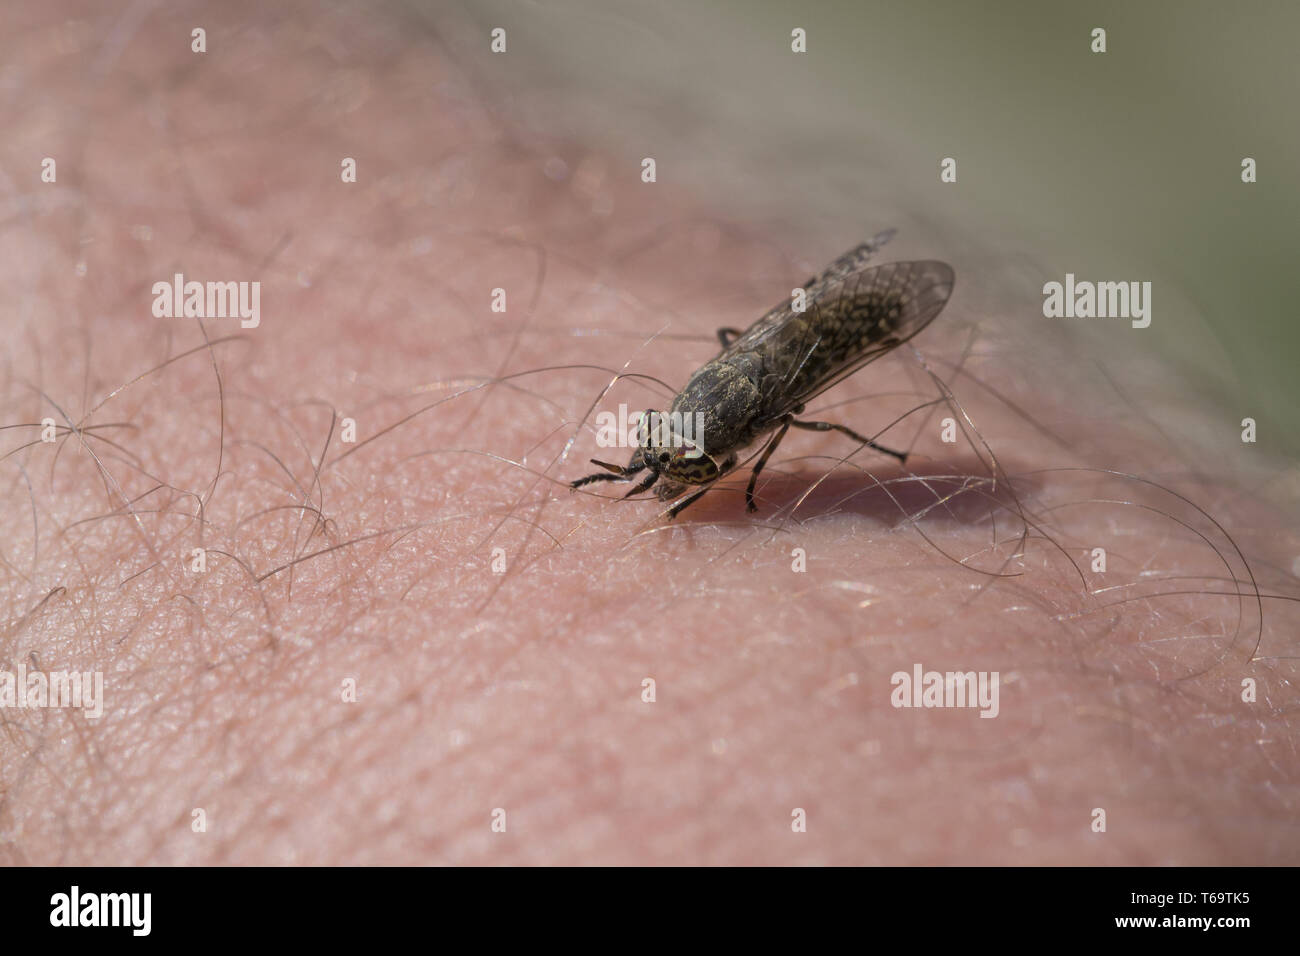 Botfly stands in human skin Stock Photo